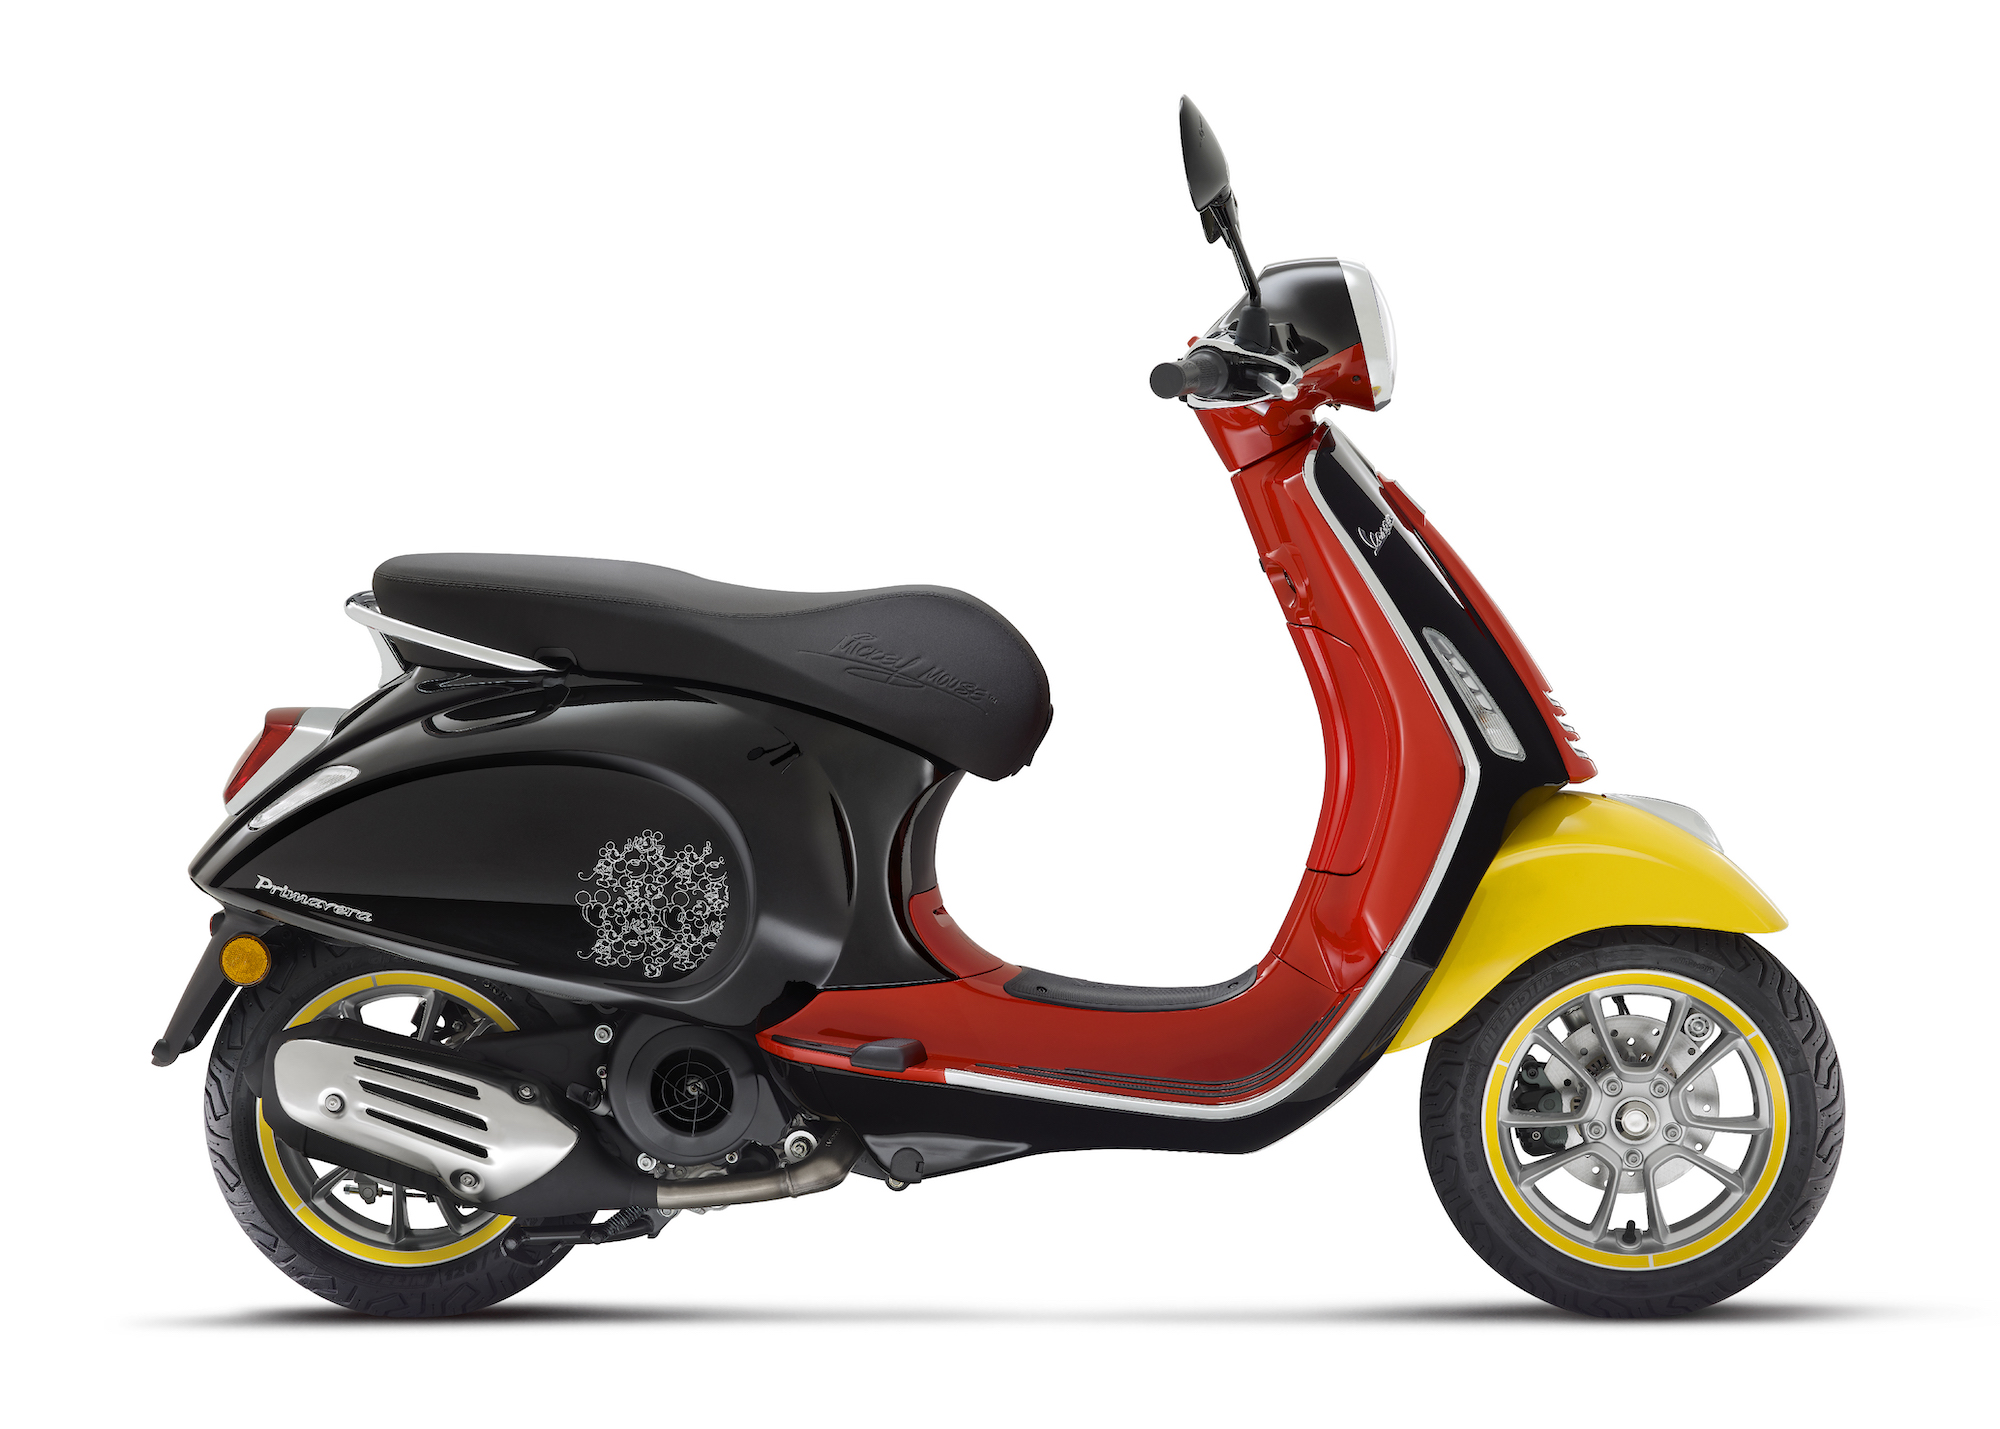 Vespa's 2023 Disney Mickey Mouse Edition scooter, built upon the brand's Primavera model. Media sourced from Piaggio's recent press release.